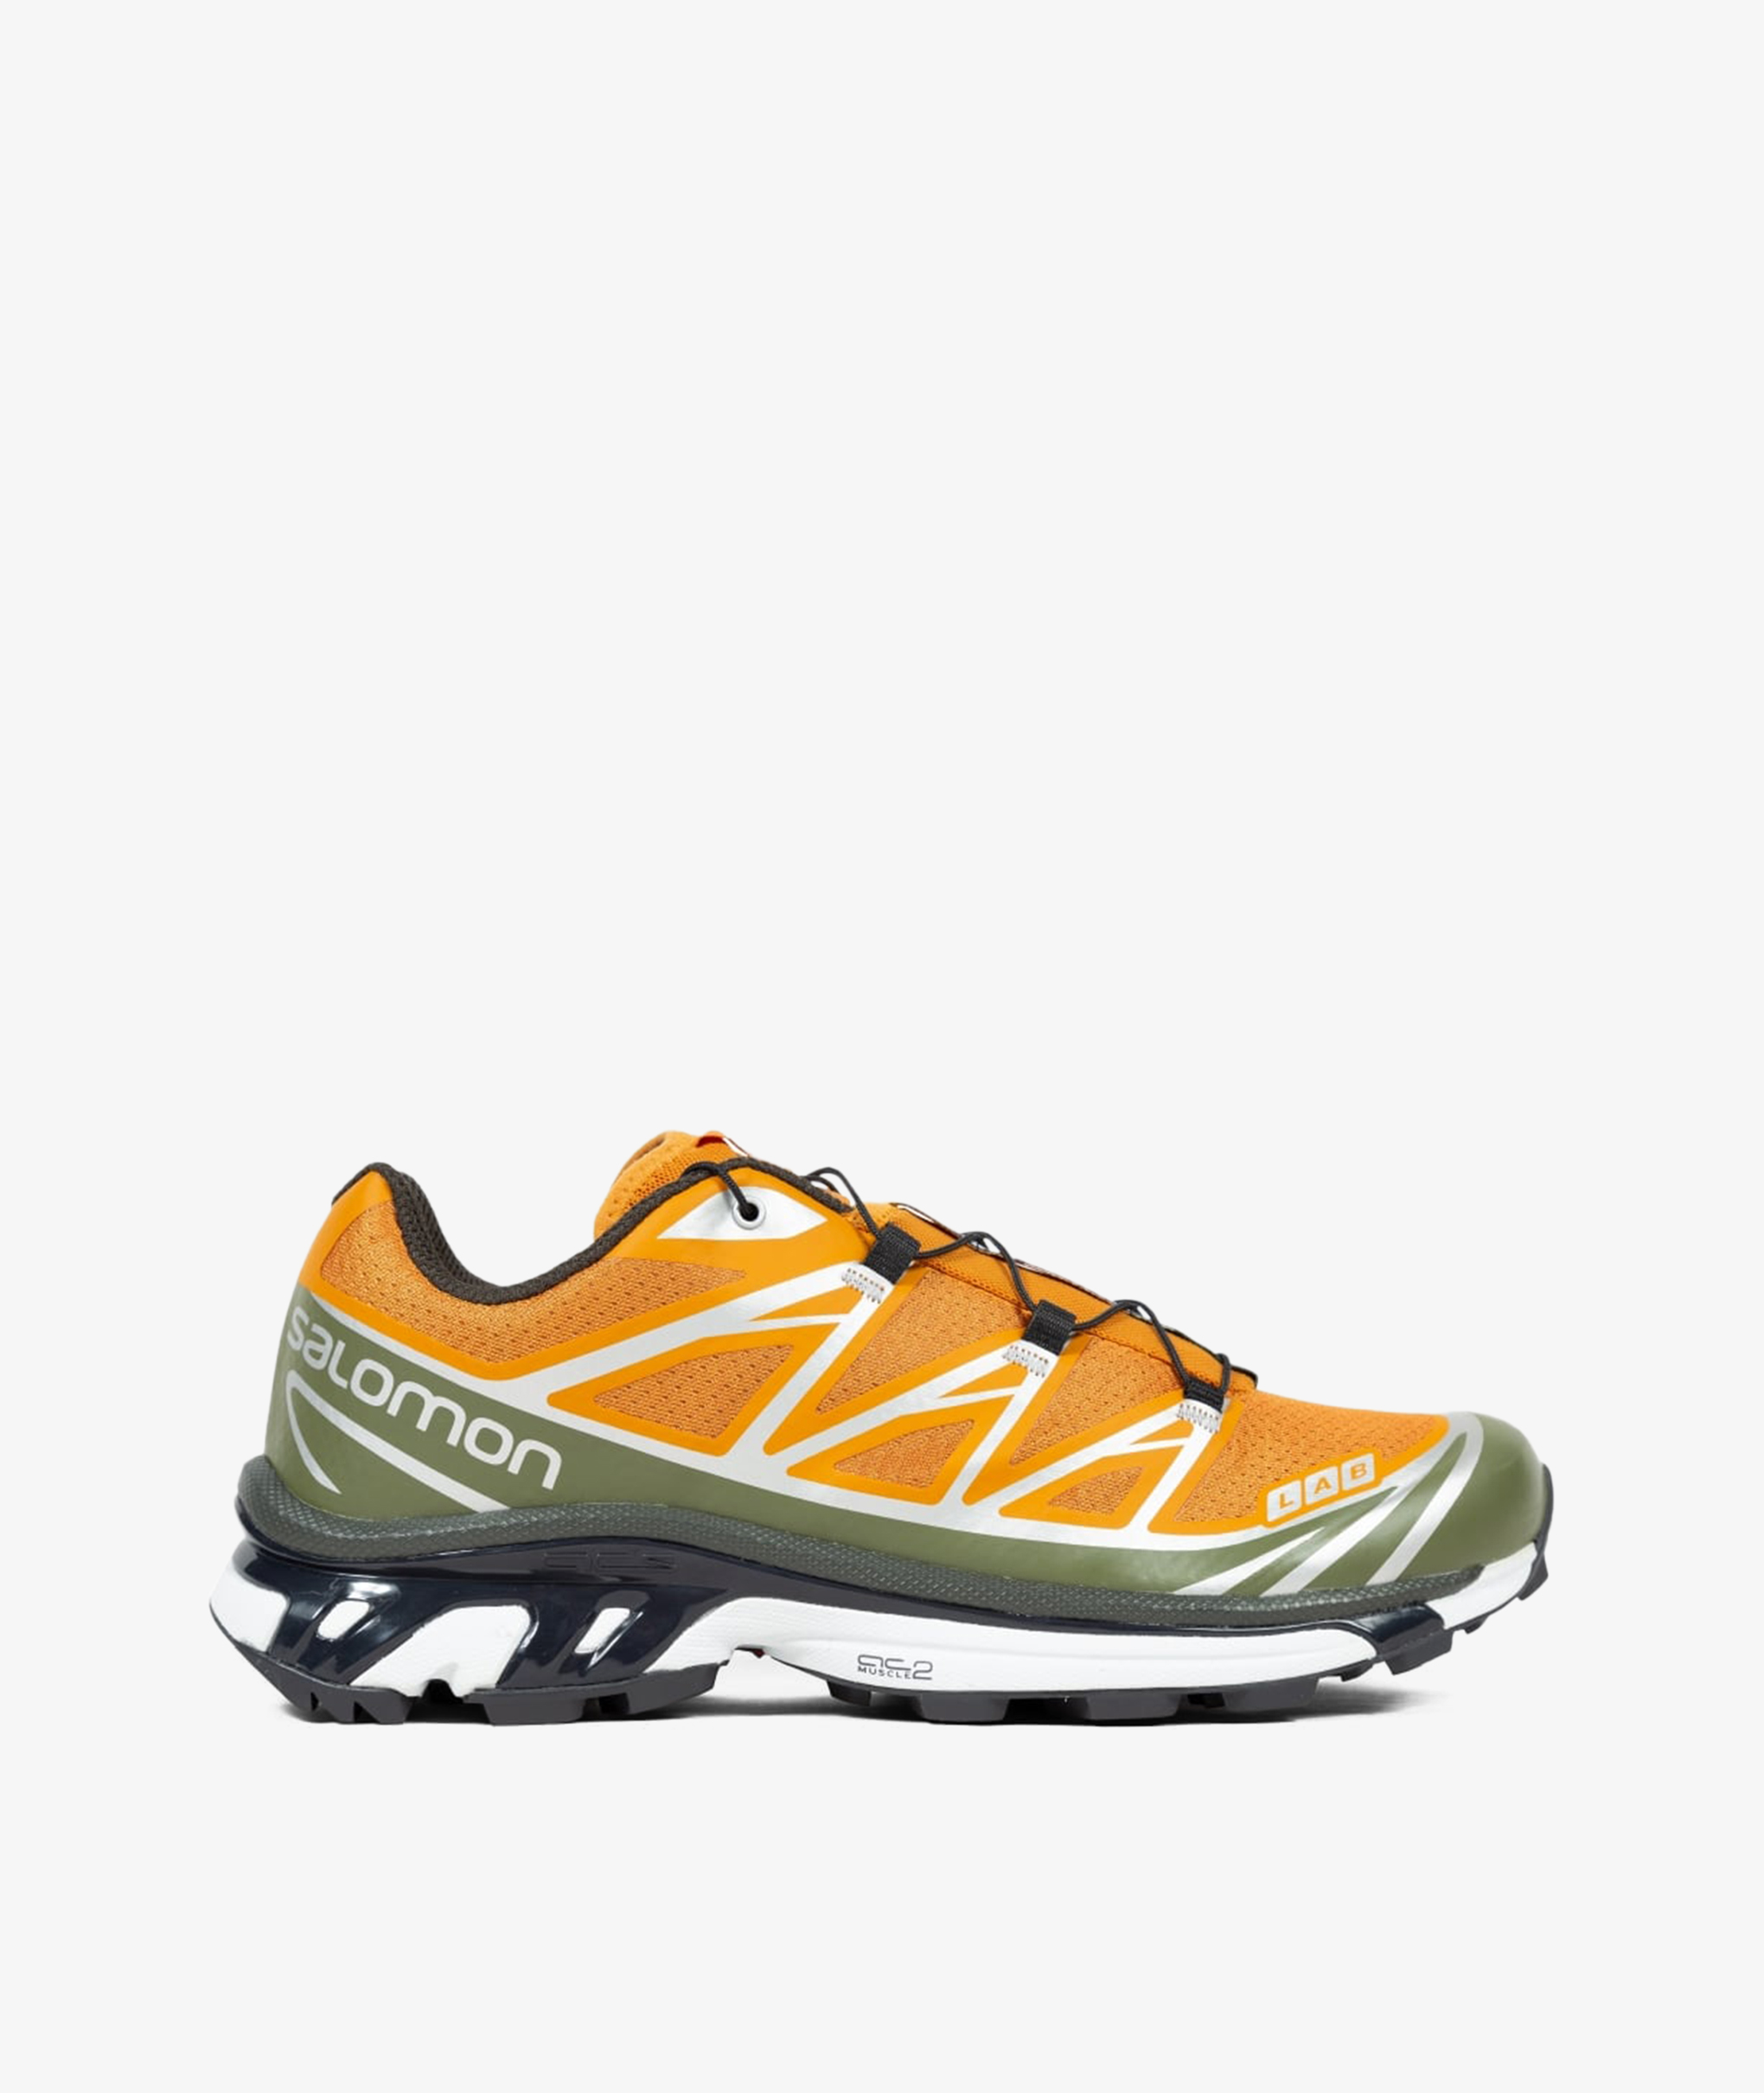 Norse Store | Shipping Worldwide - Salomon Salomon XT-6 For And ...